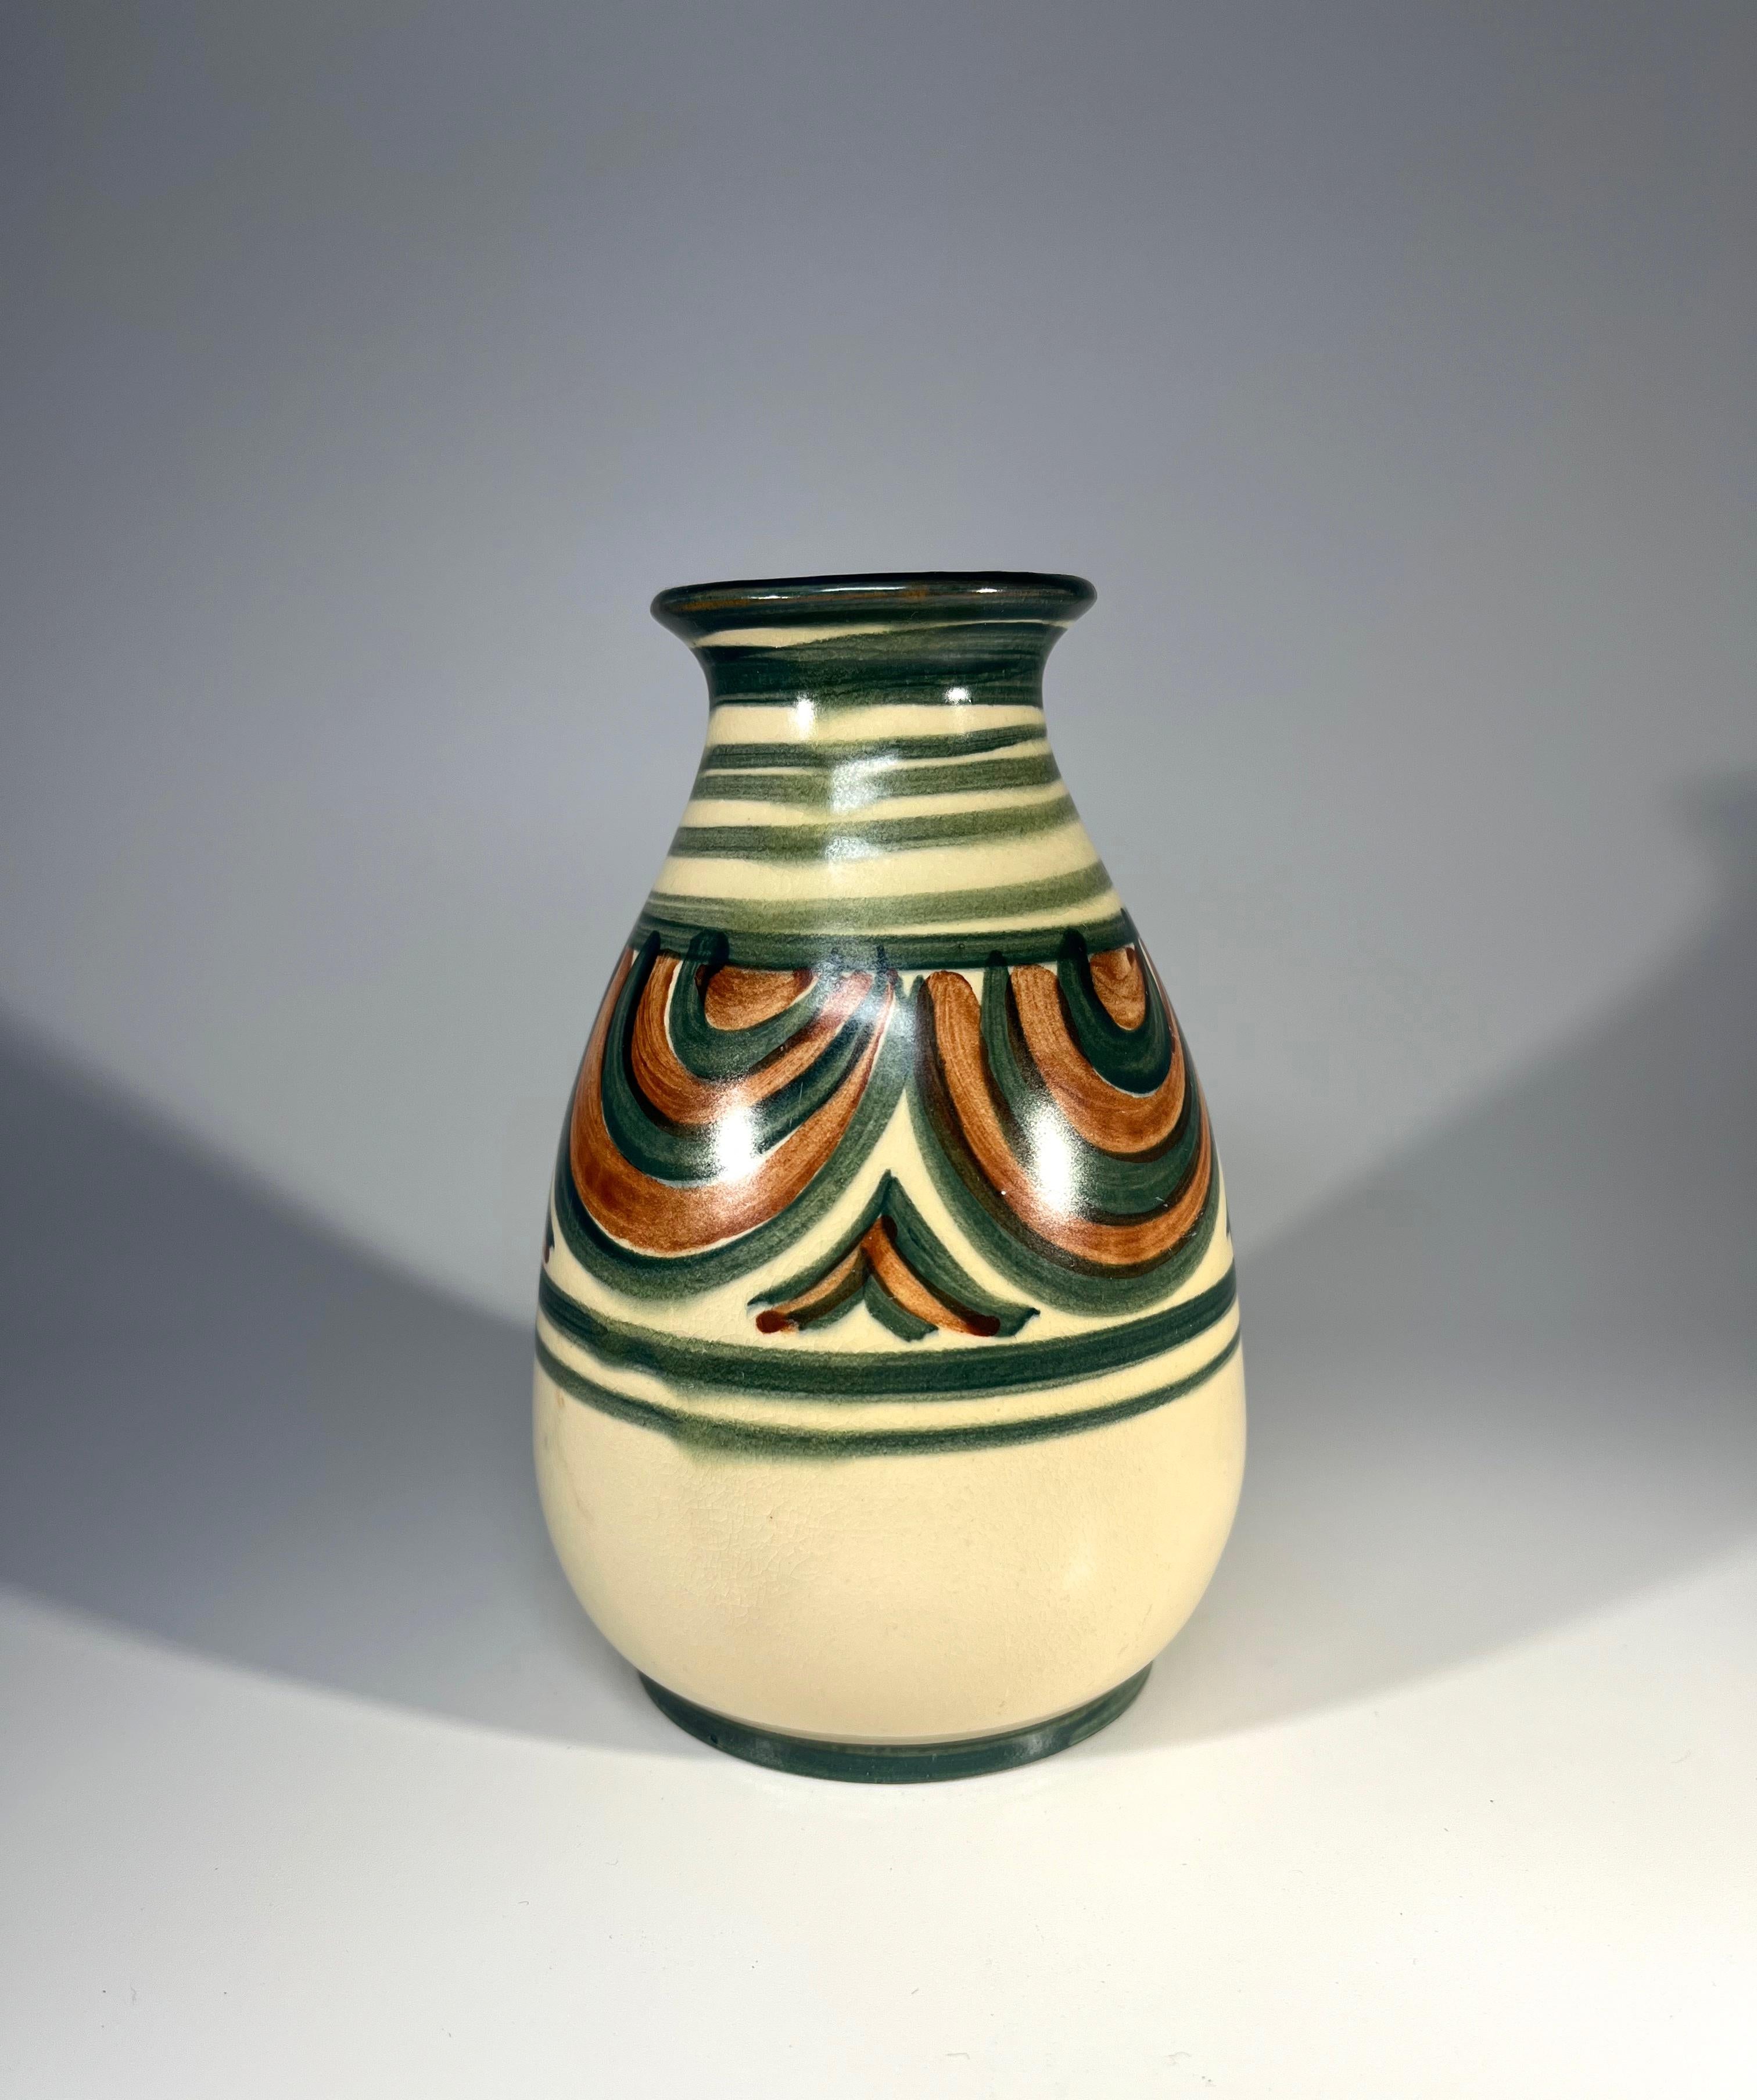 Antique, Art Deco Upsala Ekeby Glazed Ceramic Vase, Sweden c1920s In Excellent Condition For Sale In Rothley, Leicestershire